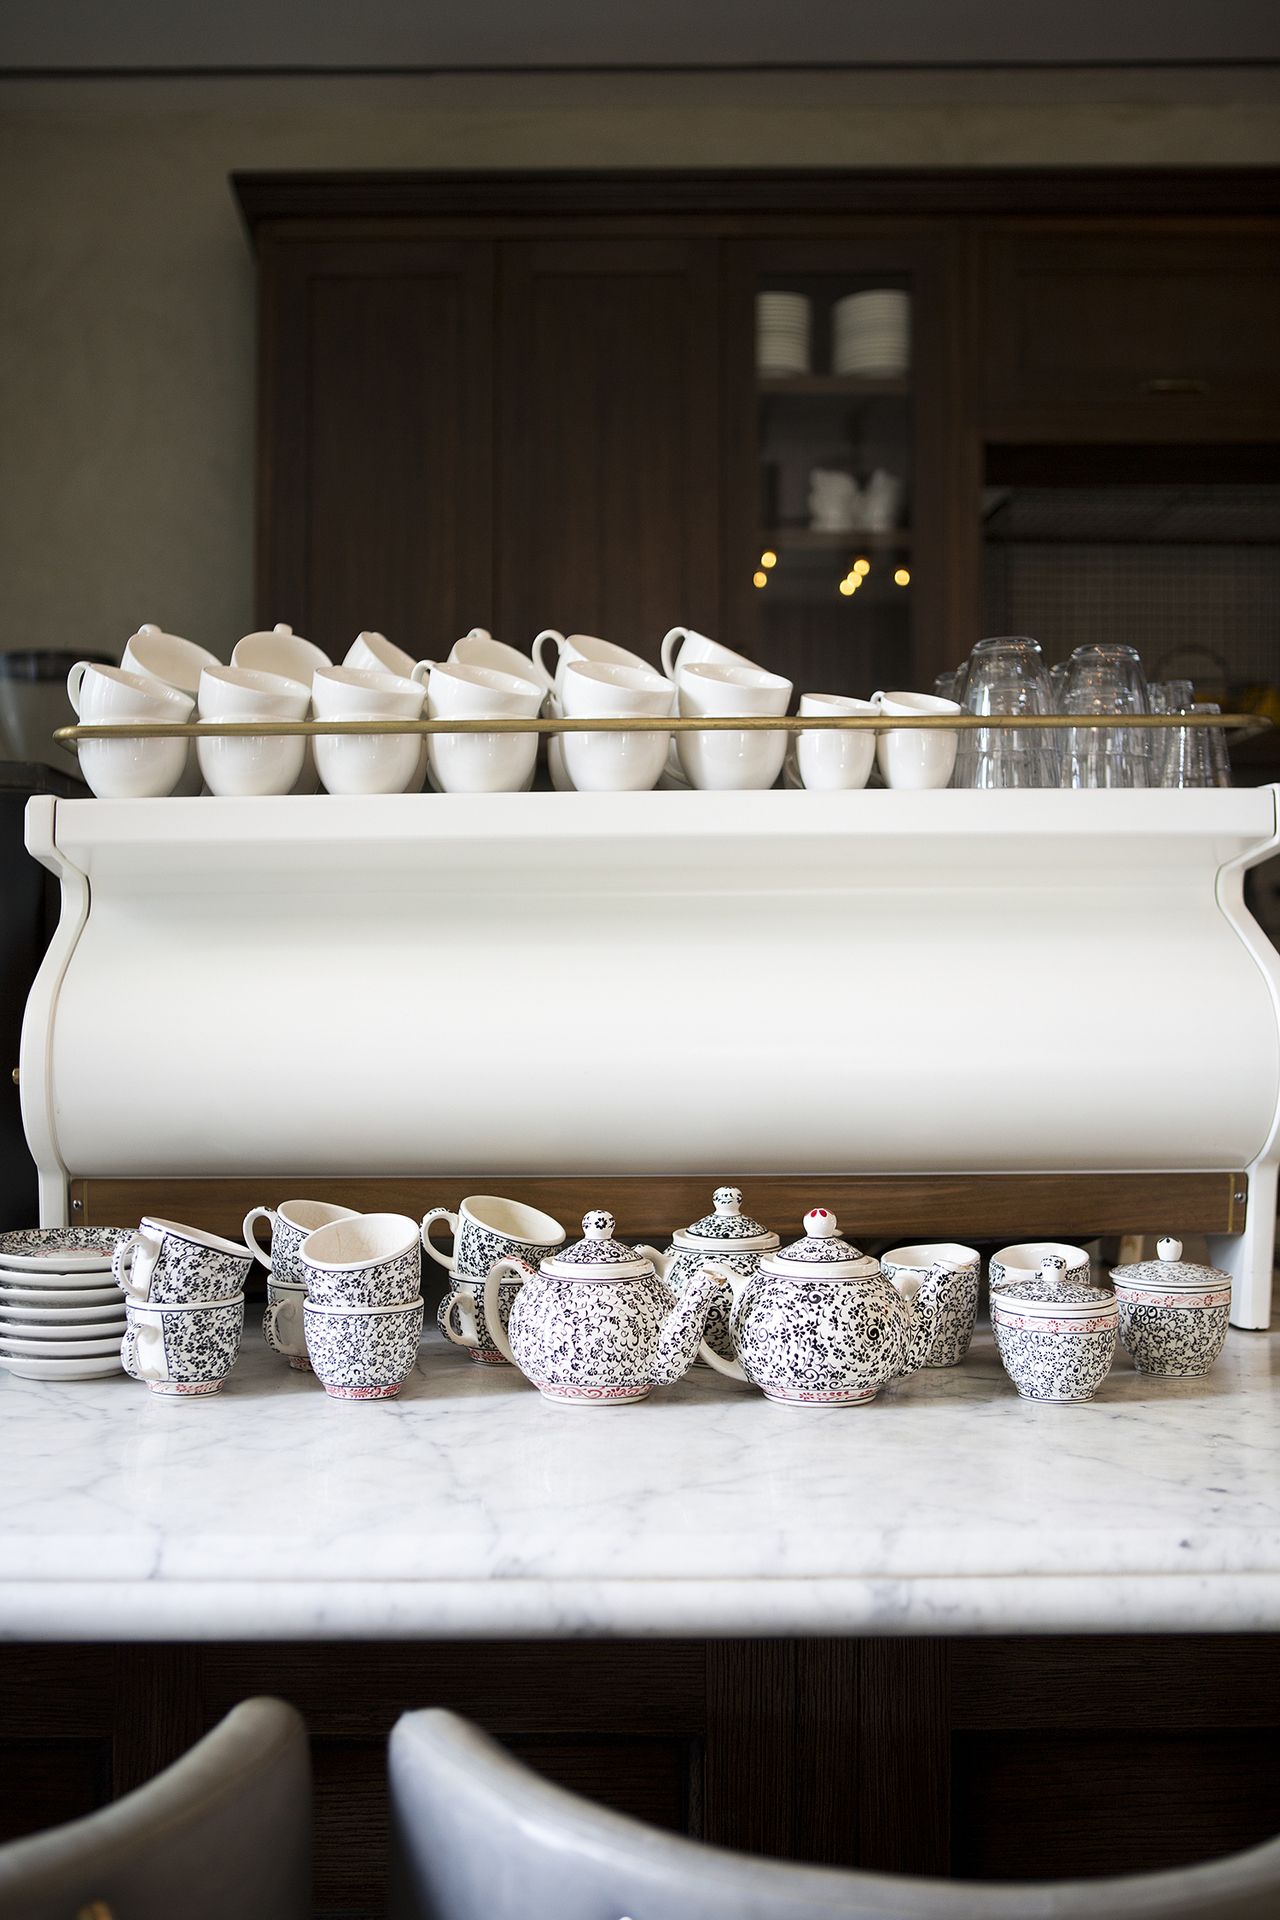 A coffee machine with stacks of patterned teacups